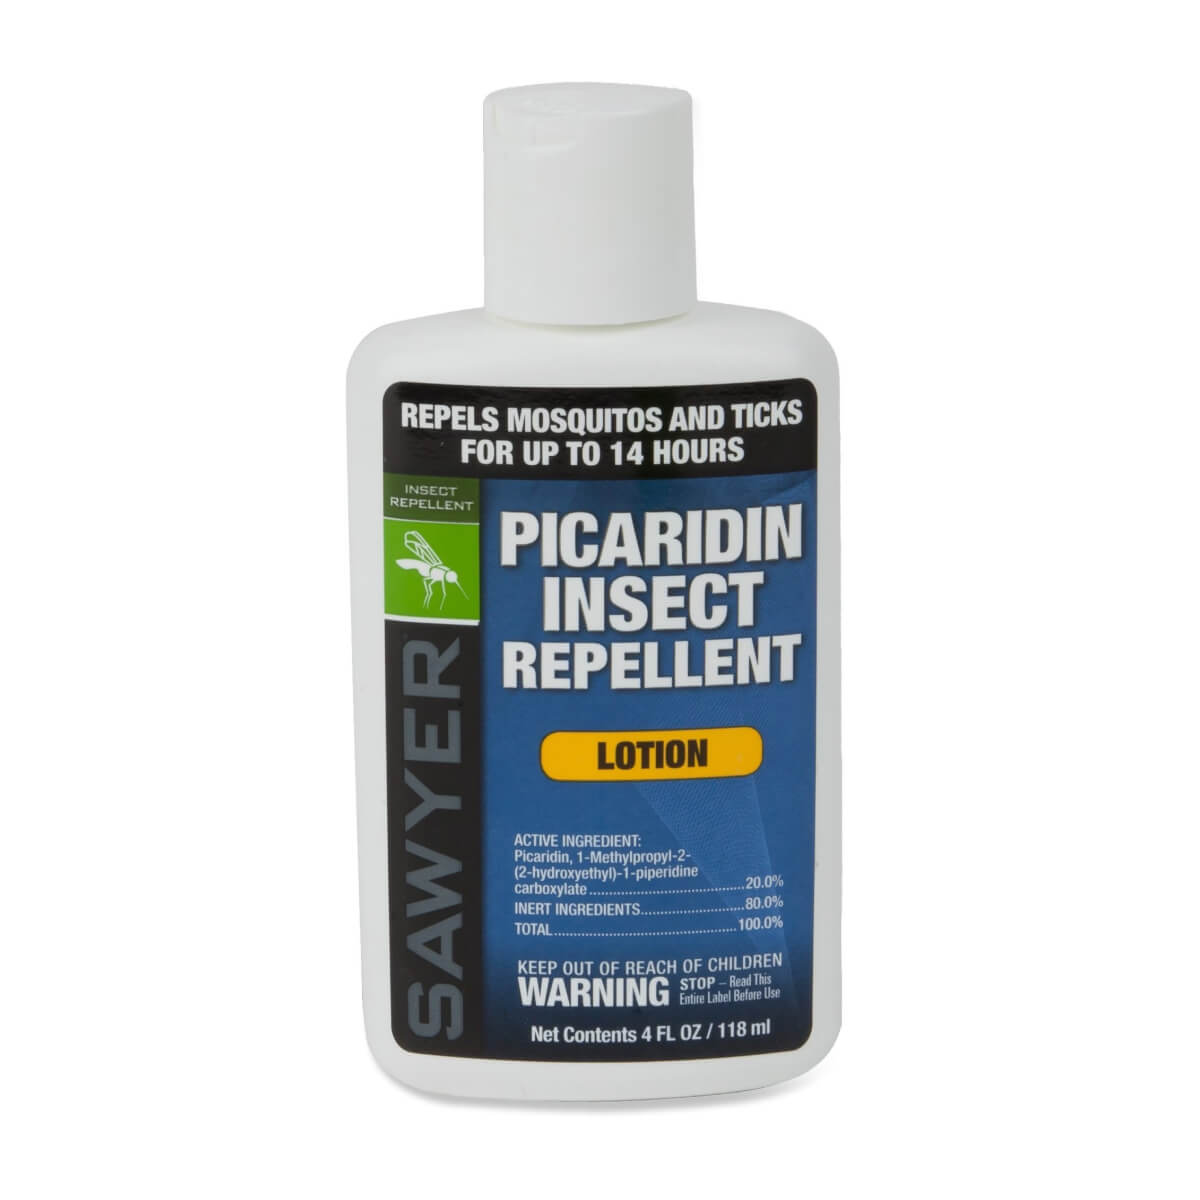 Sawyer Picardin Insect Lotion as a hiking gift idea